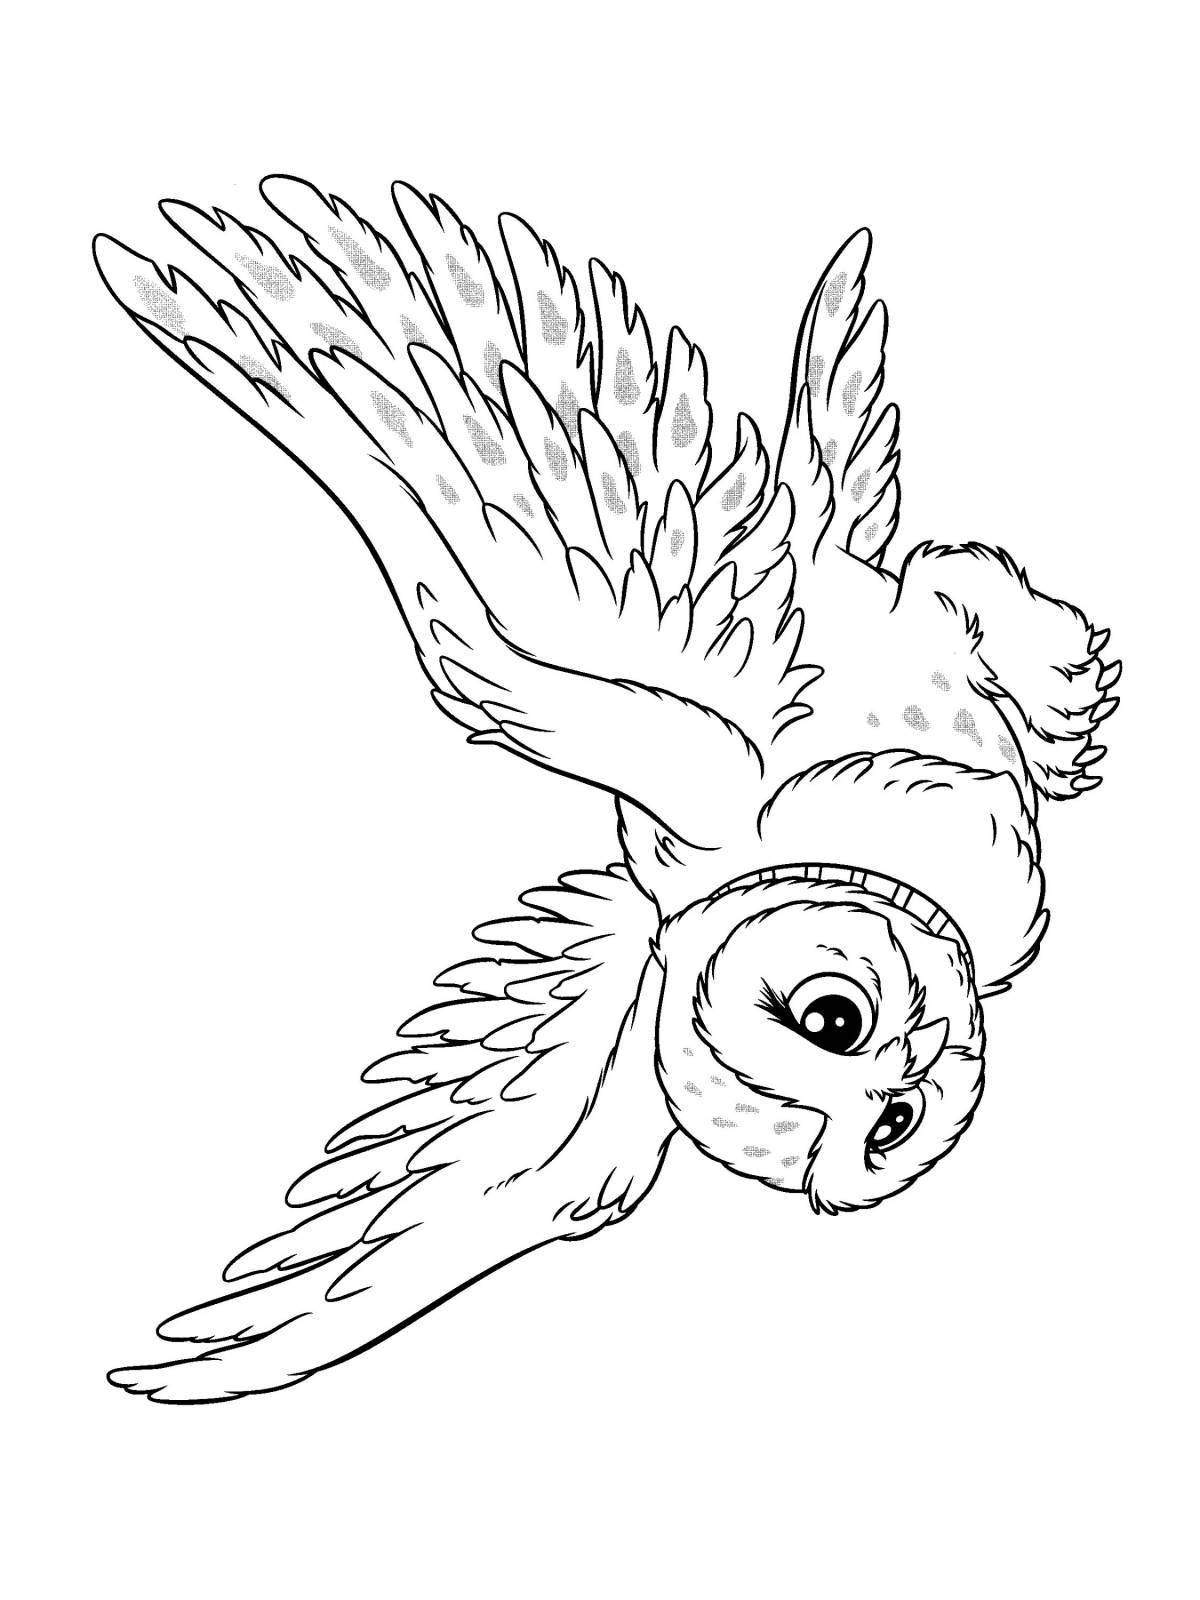 Adorable harry potter owl coloring page